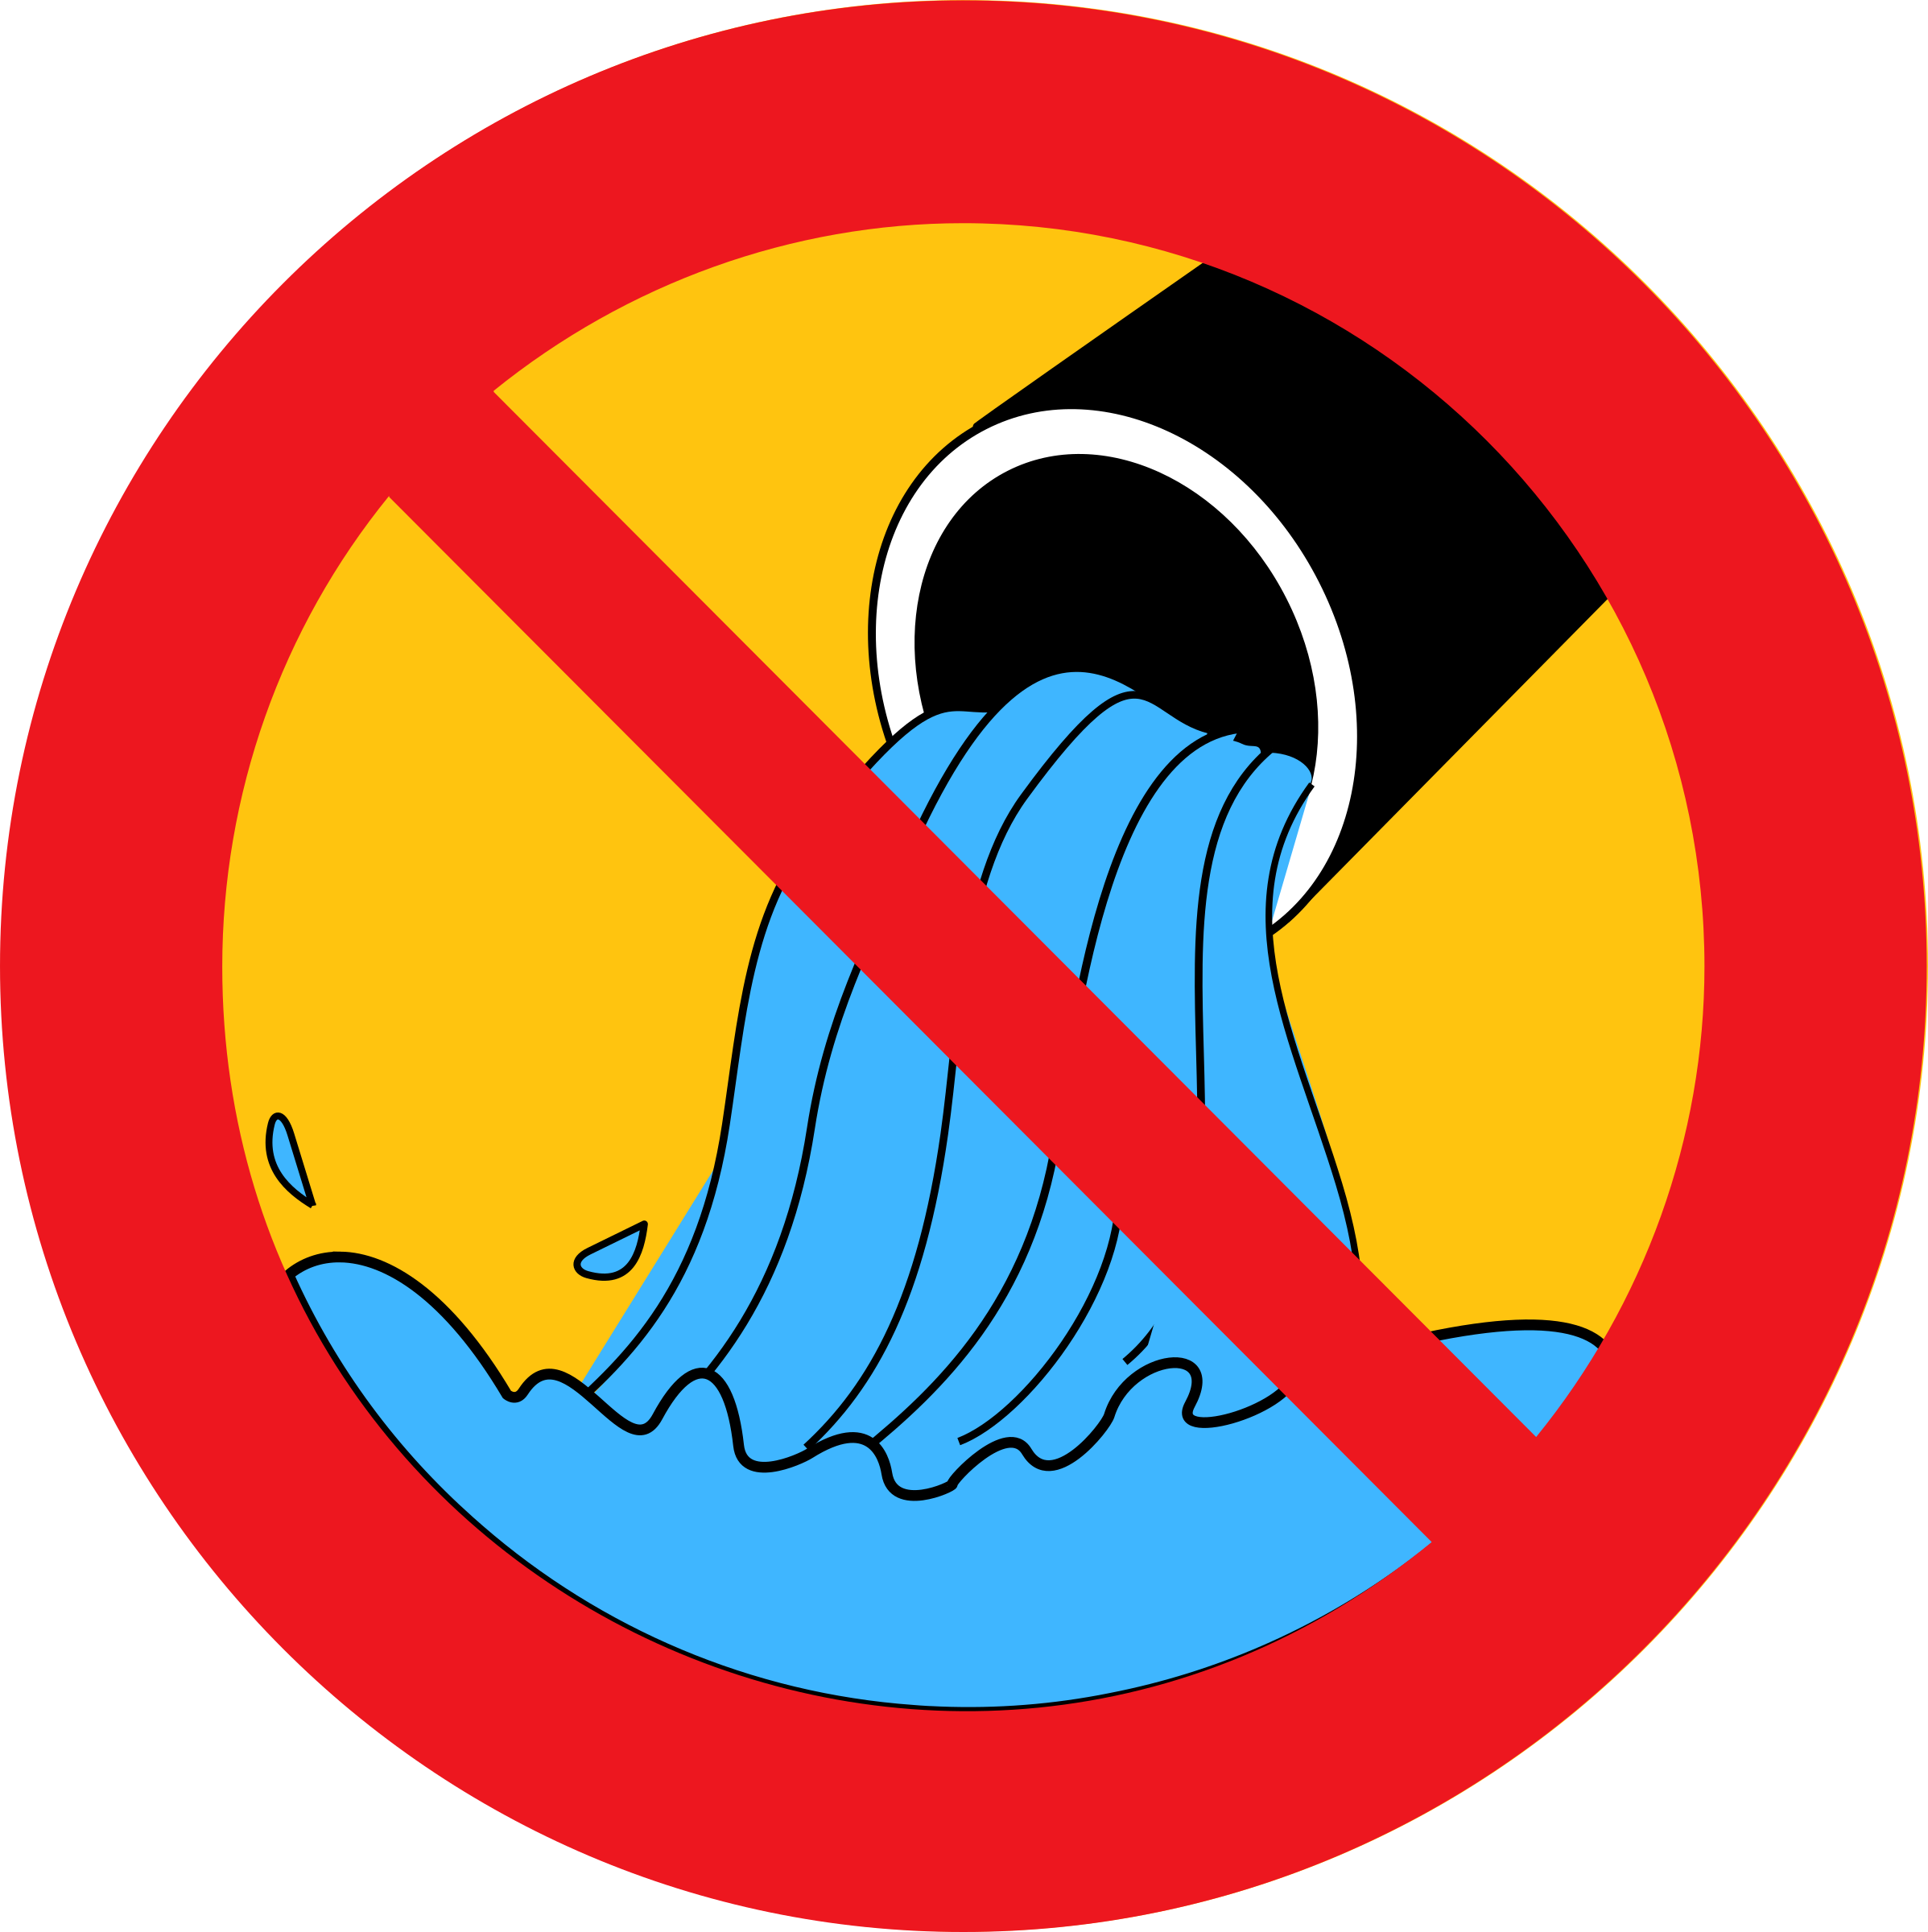 showering clipart waste water